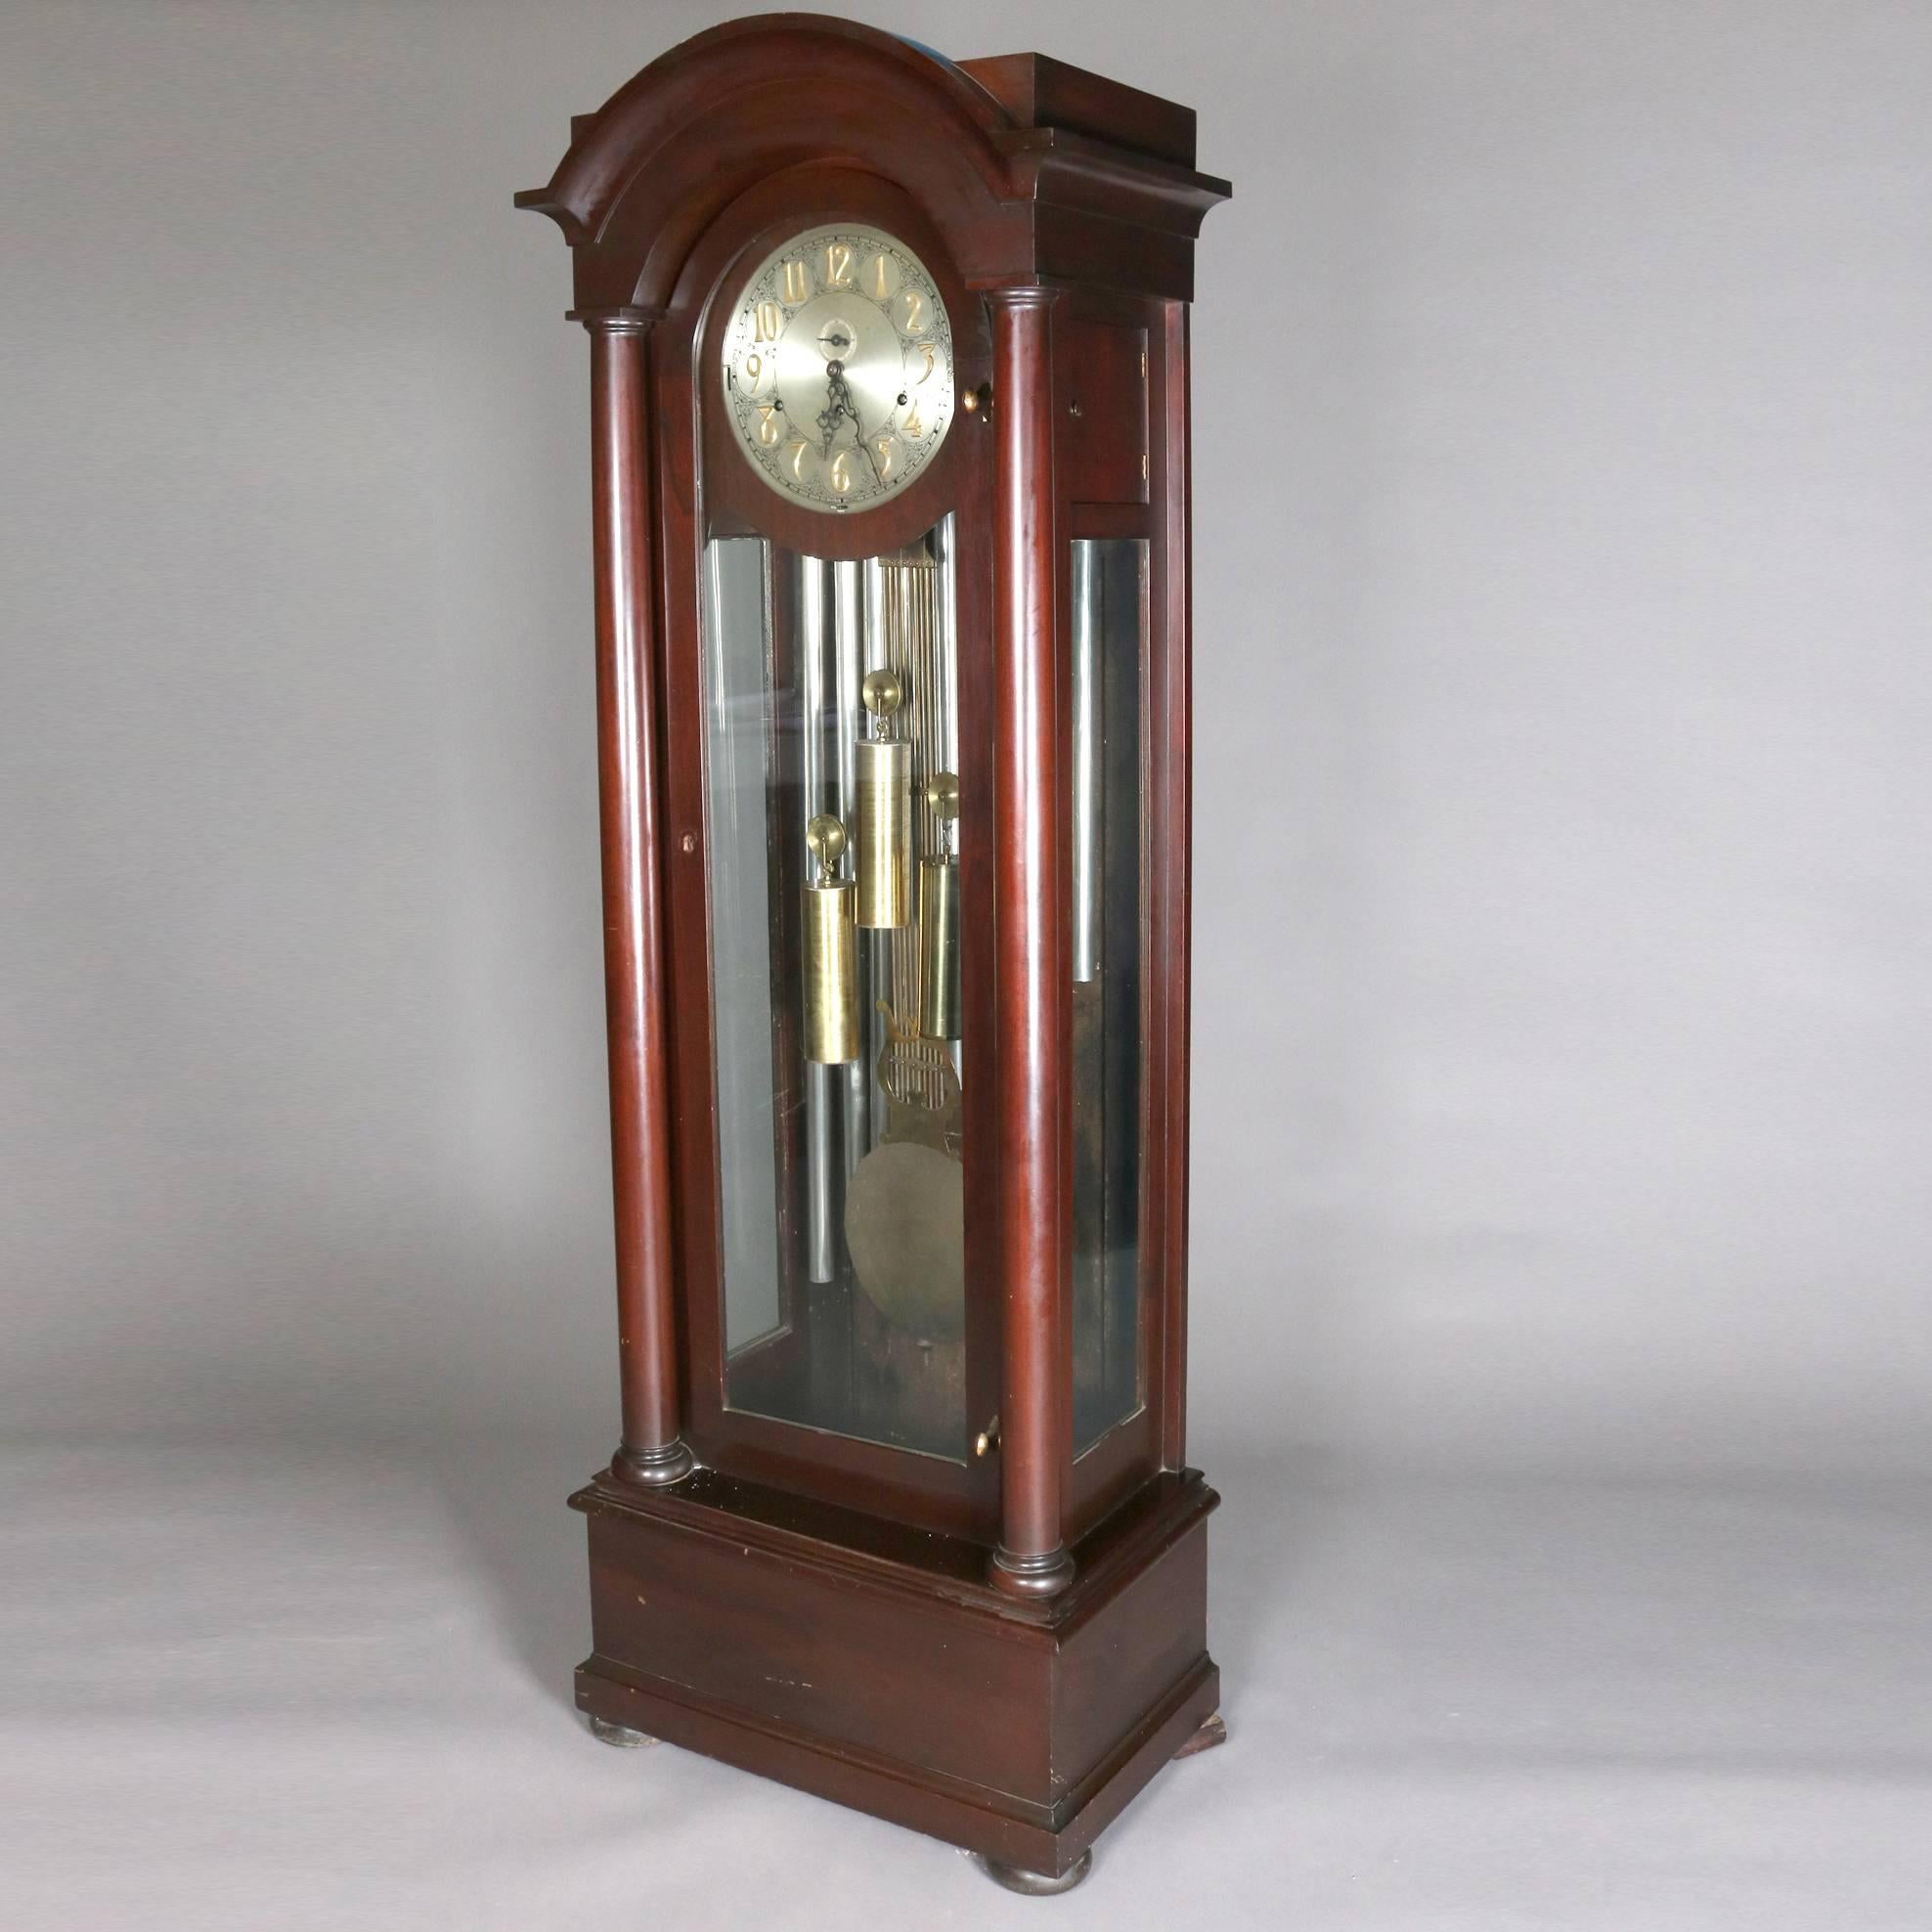 Antique American Empire grandfather clock by Jacques features arched mahogany case with column supports with glass sides and front, signed on face bottom centre, 19th century

Measures - 76" H x 27" W x 16" D.